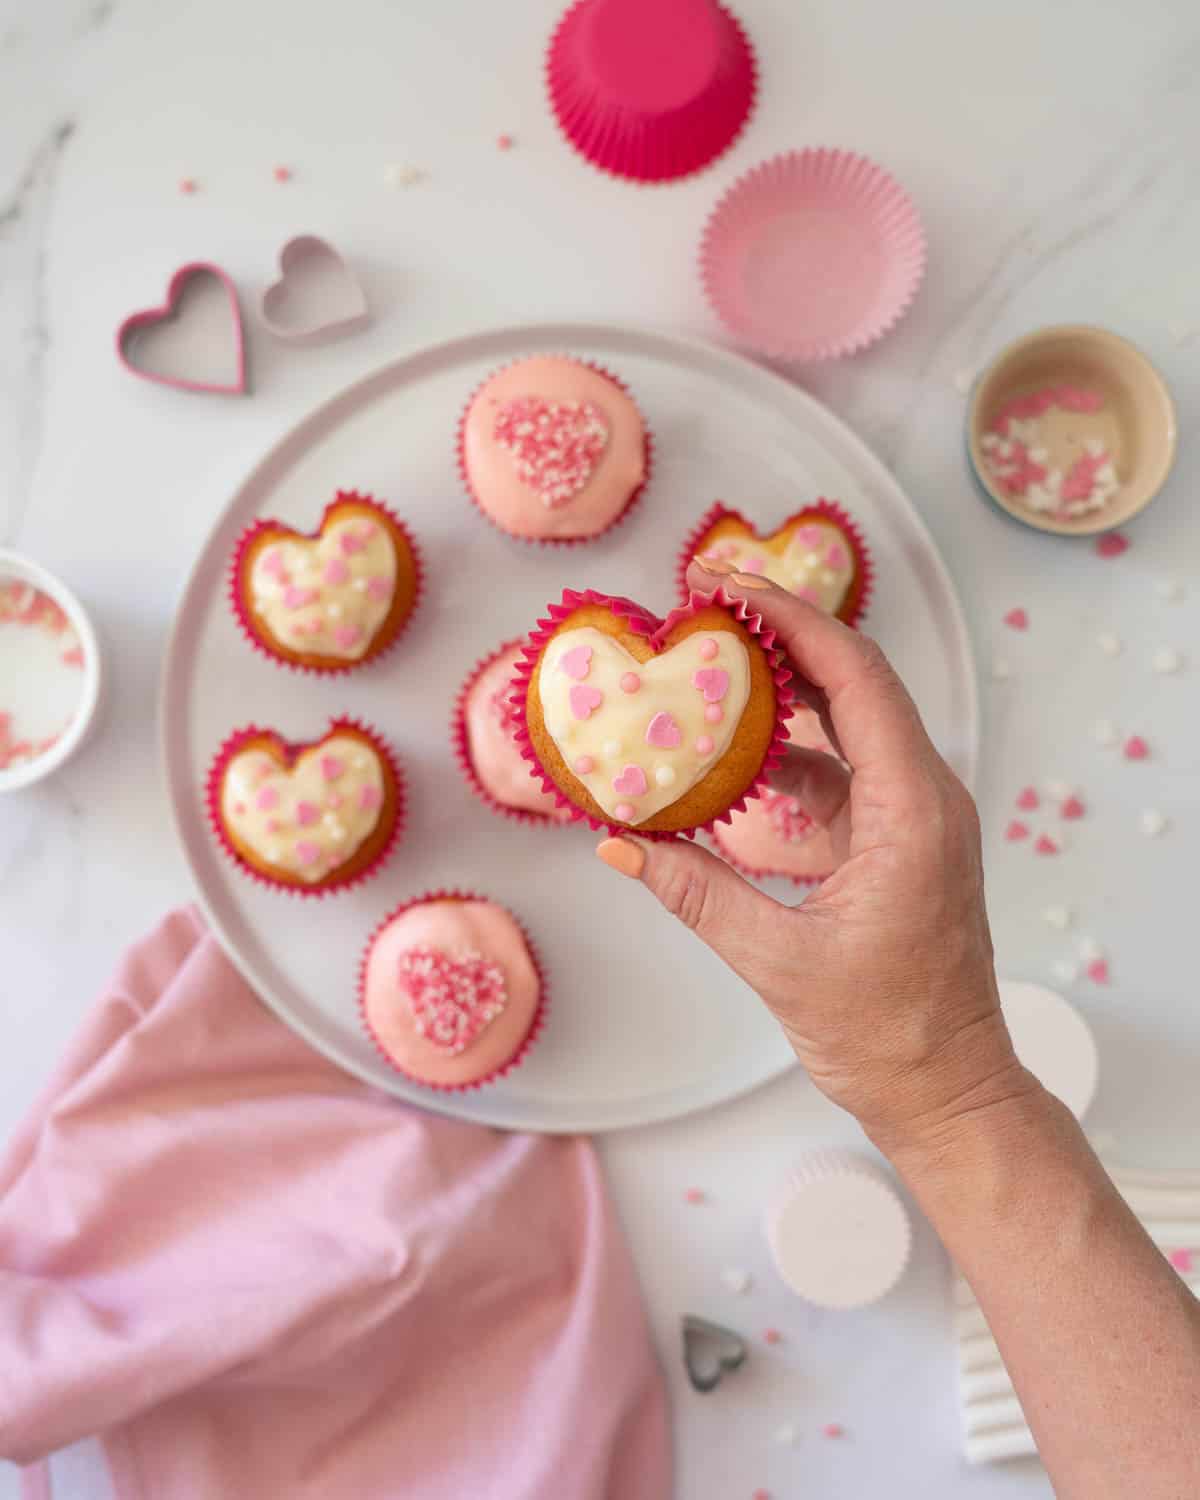 A heart shaped cupcake, frosted with white glaze, and topped with pink and white heart shaped sprinkles.